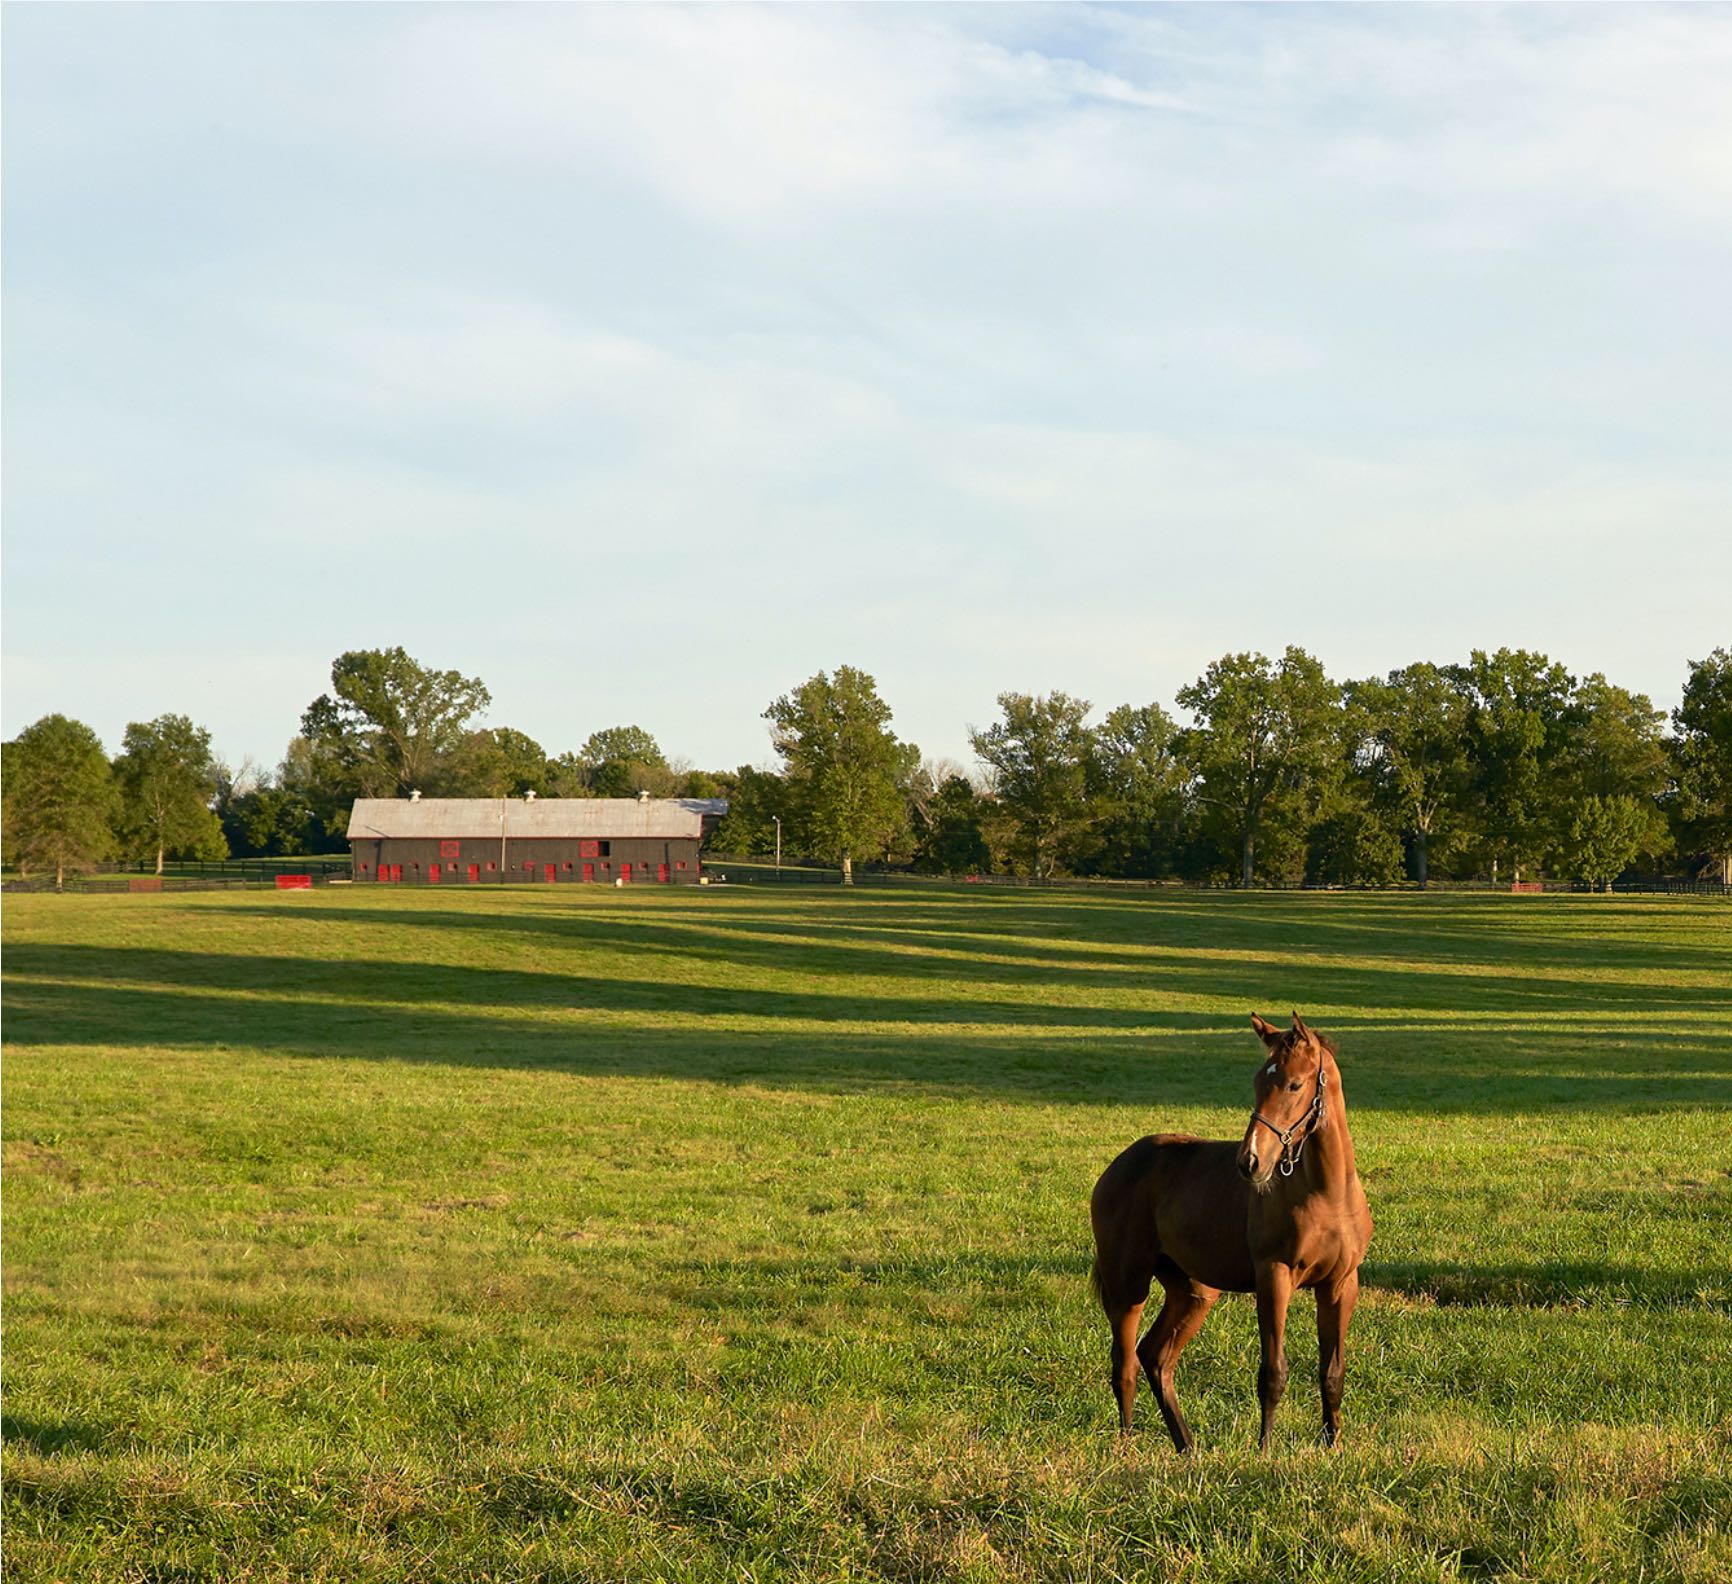 horse in a field with a barn in the distance